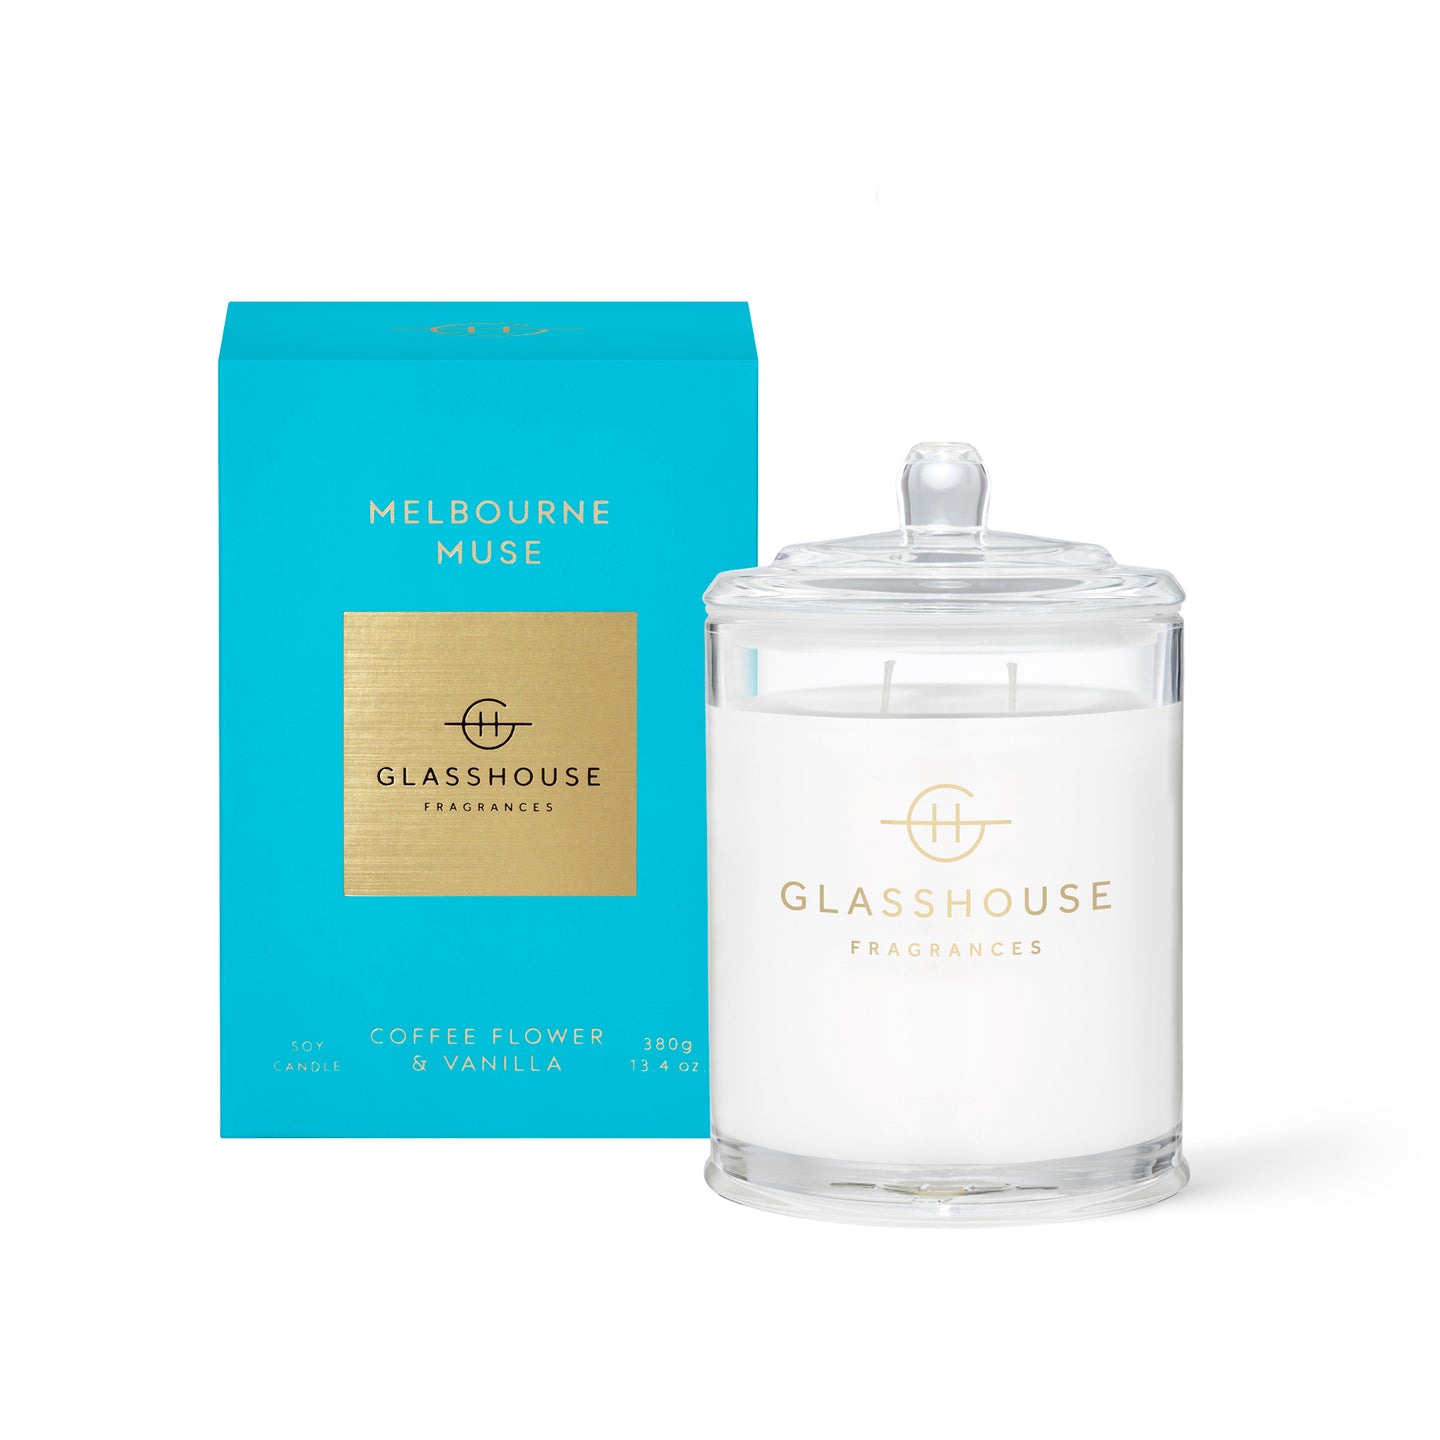 Melbourne Muse by Glasshouse 380g-Soy-CandleGlasshouse Candle 380g Soy Candle melbourne muse